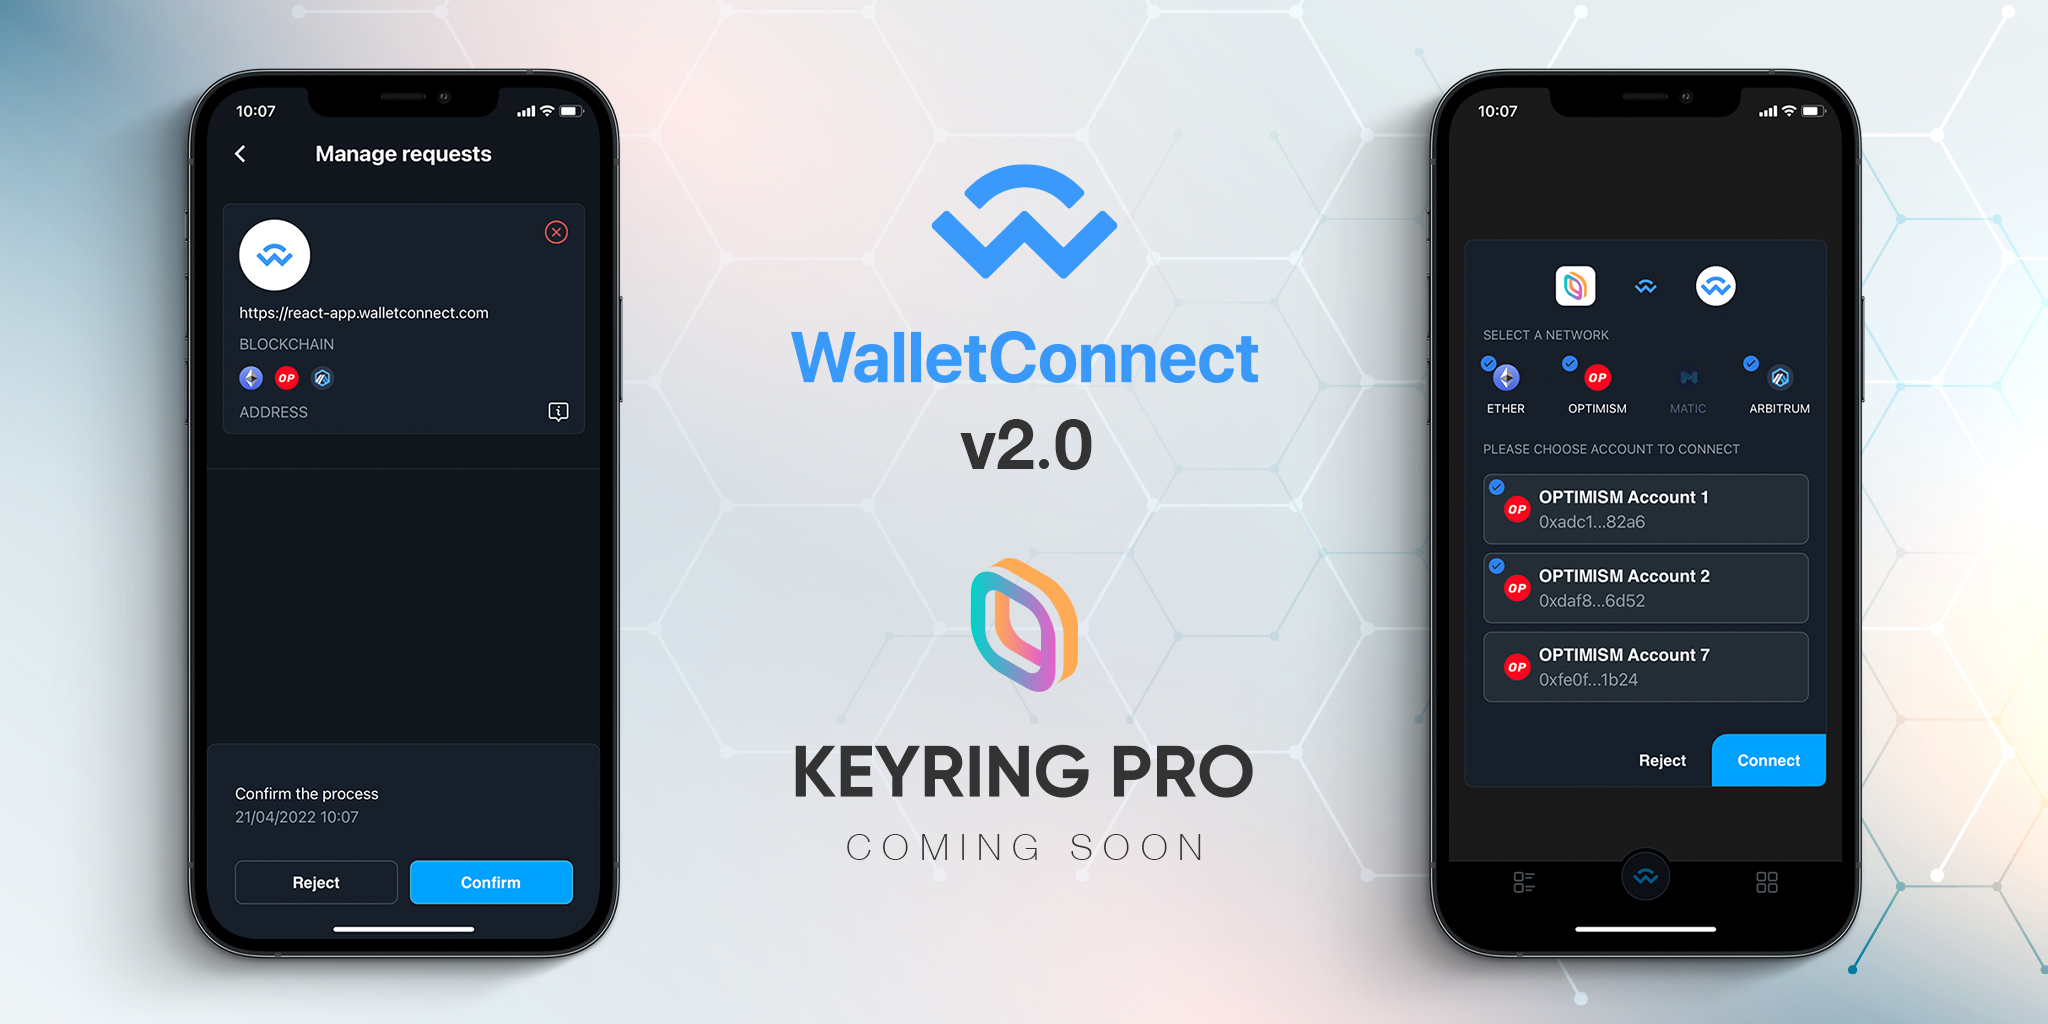 wallet connect 2.0